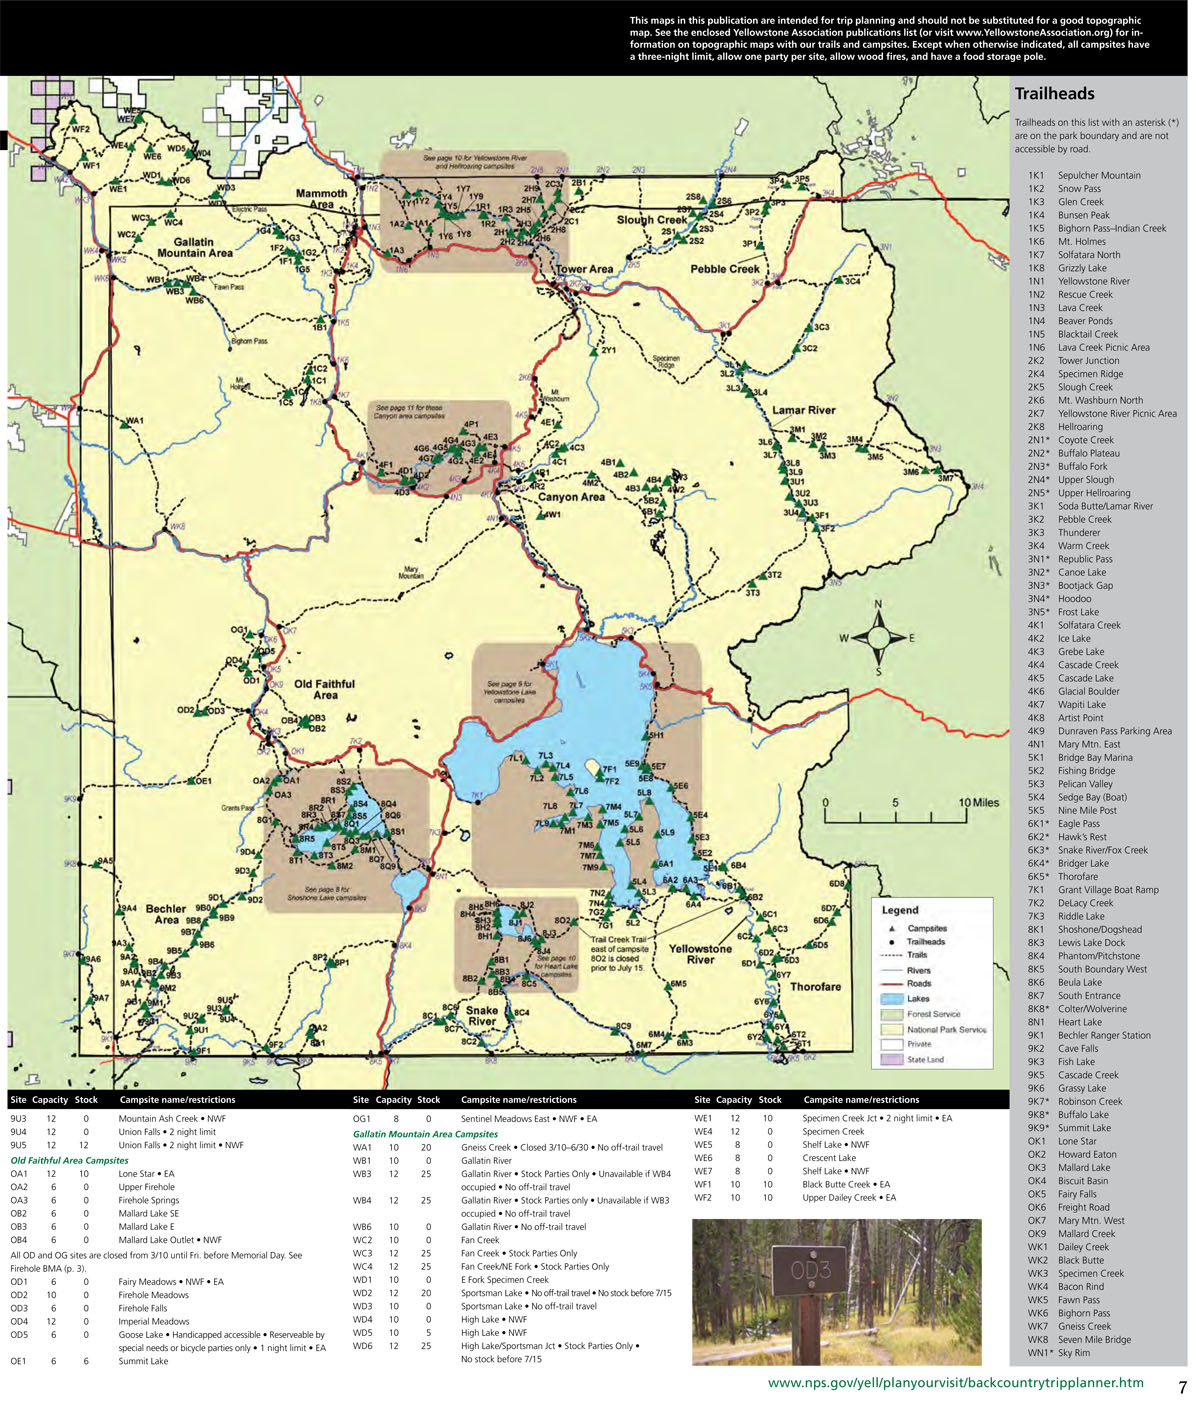 Backcountry Campsite Map of Yellowstone National Park